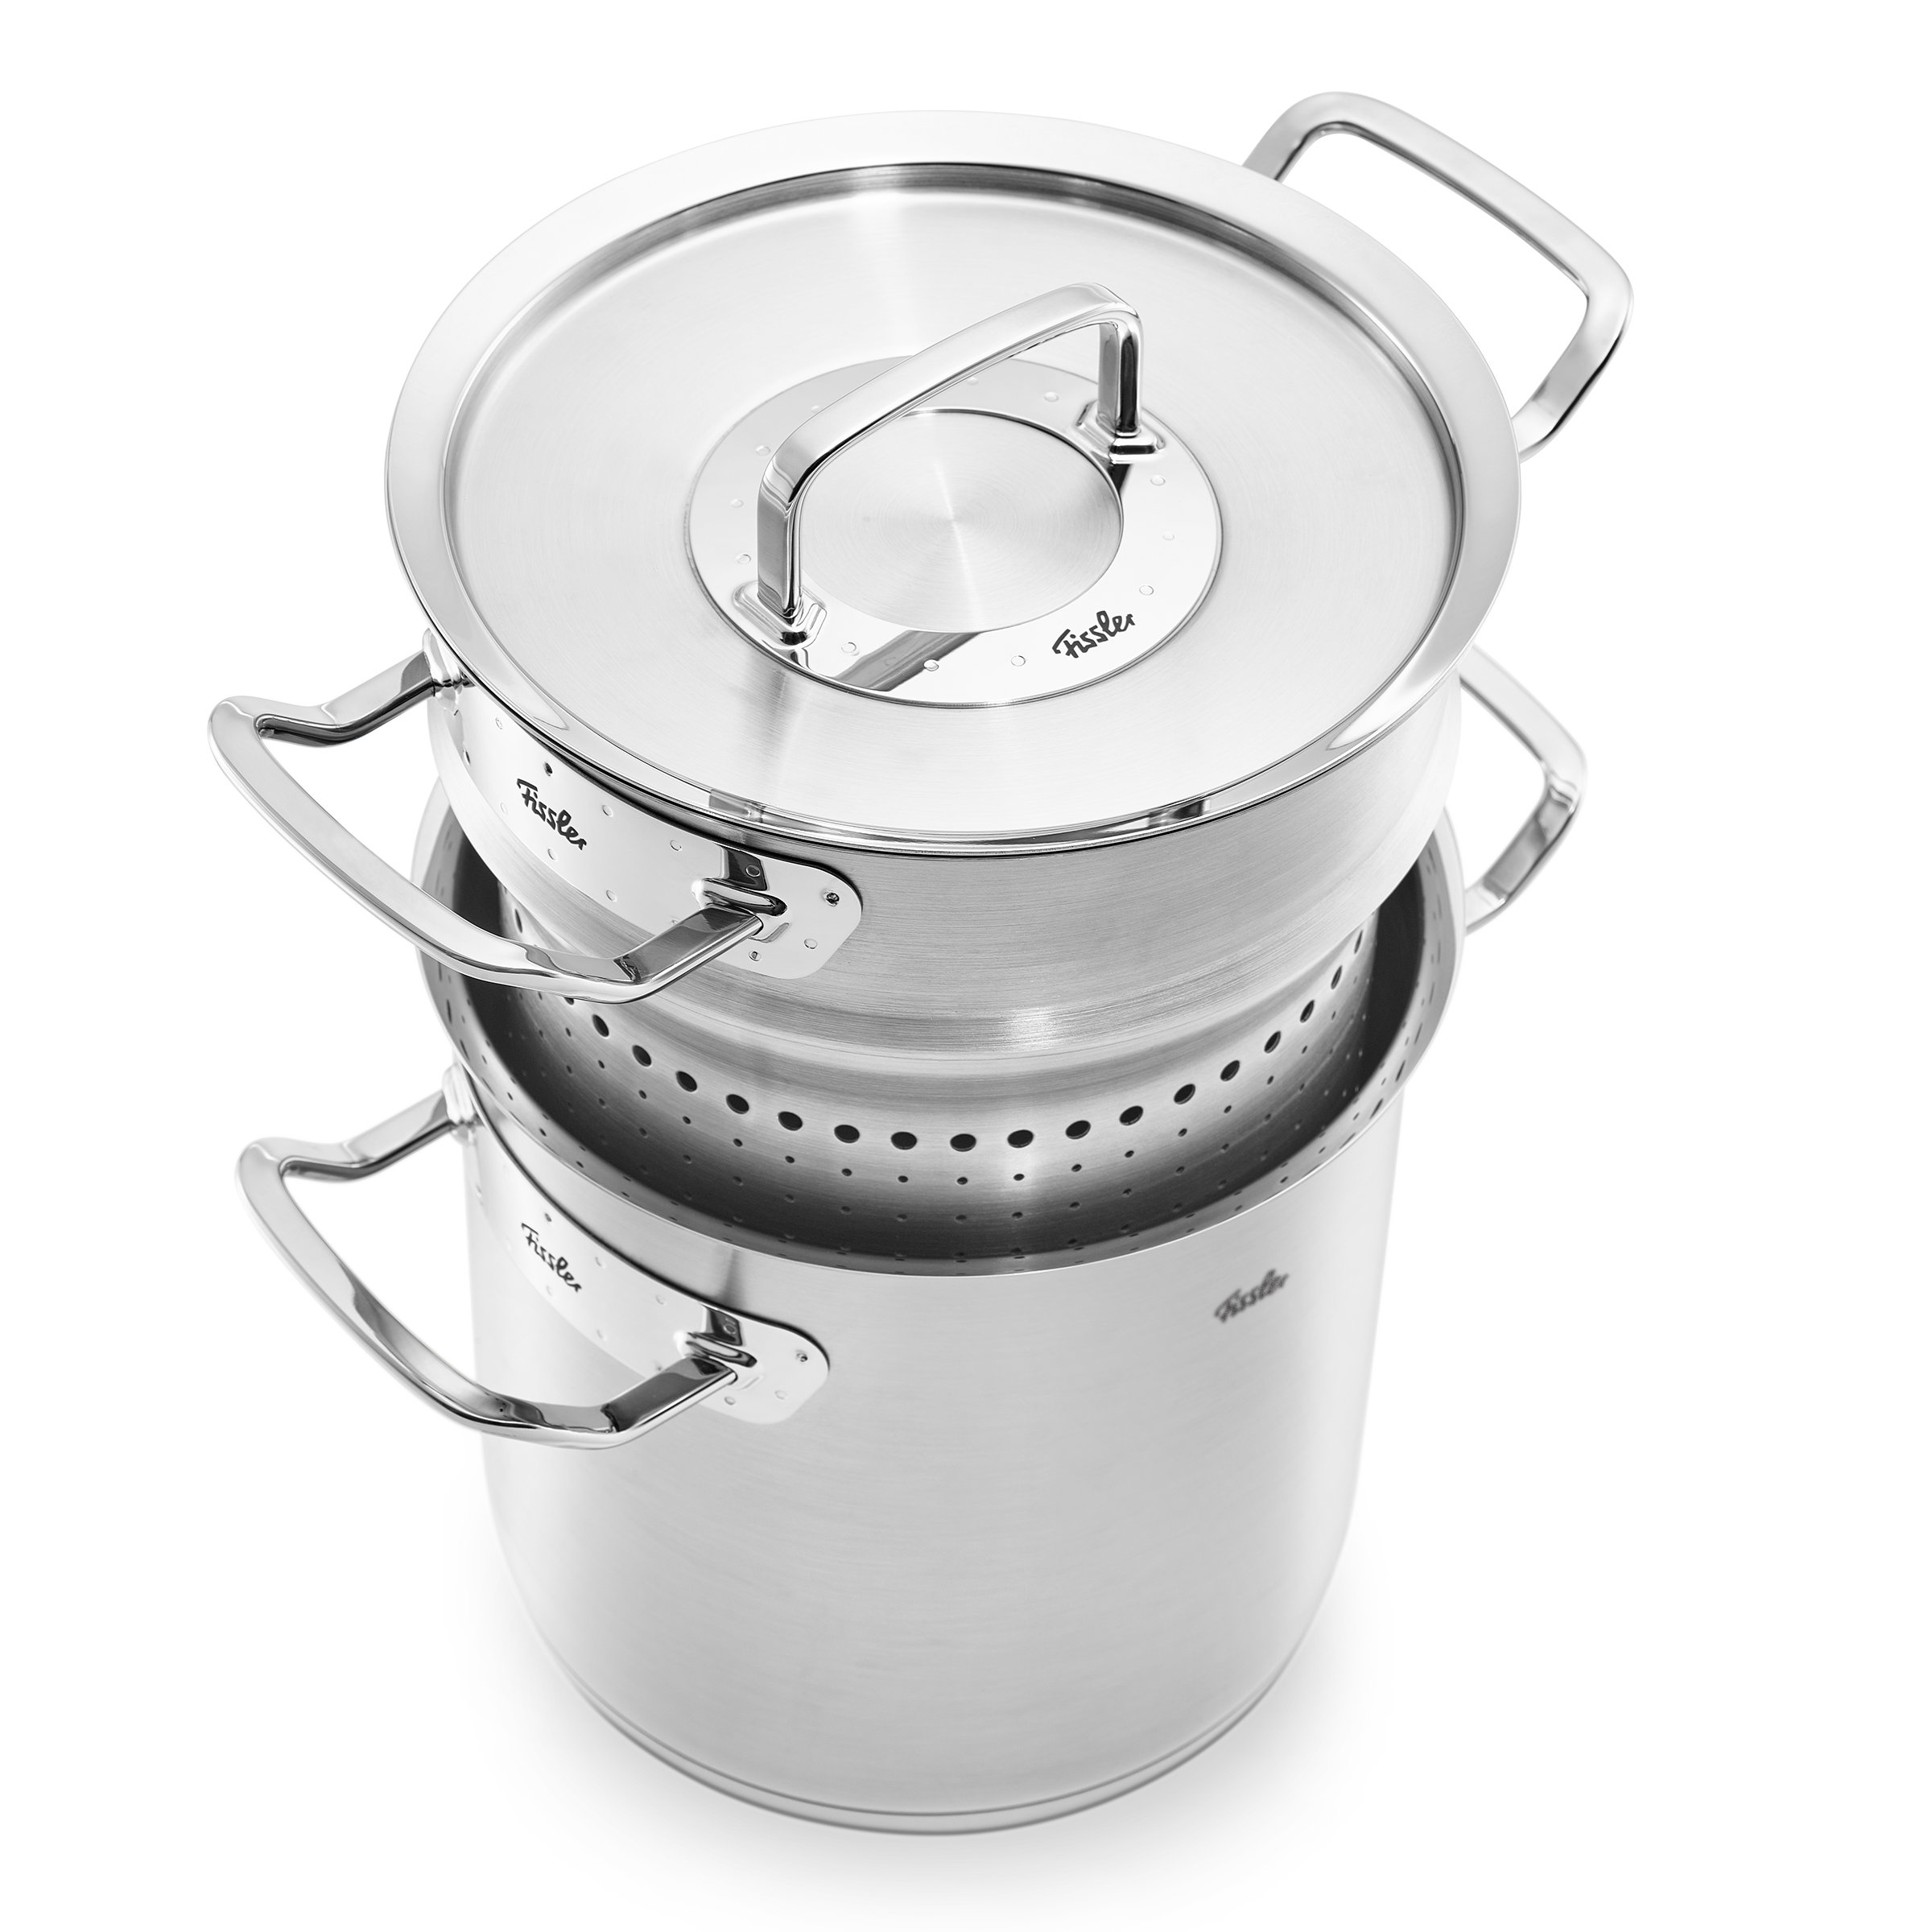 Fissler Original-Profi Collection® Stainless Steel Multipot With Steamer 8